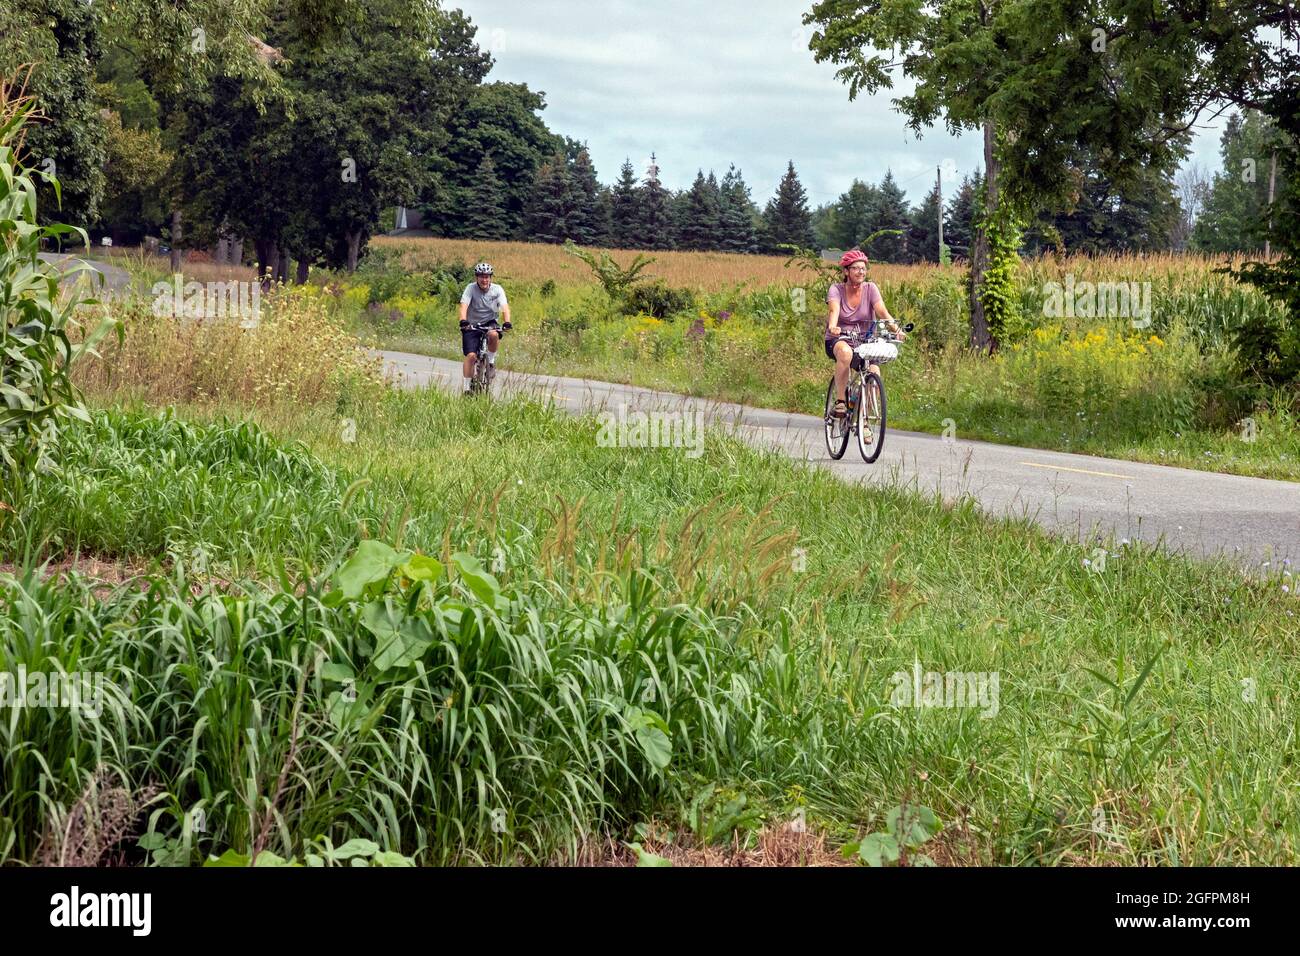 Three Oaks, Michigan - Bicycle riders on a rural road in southwest Michigan. Stock Photo